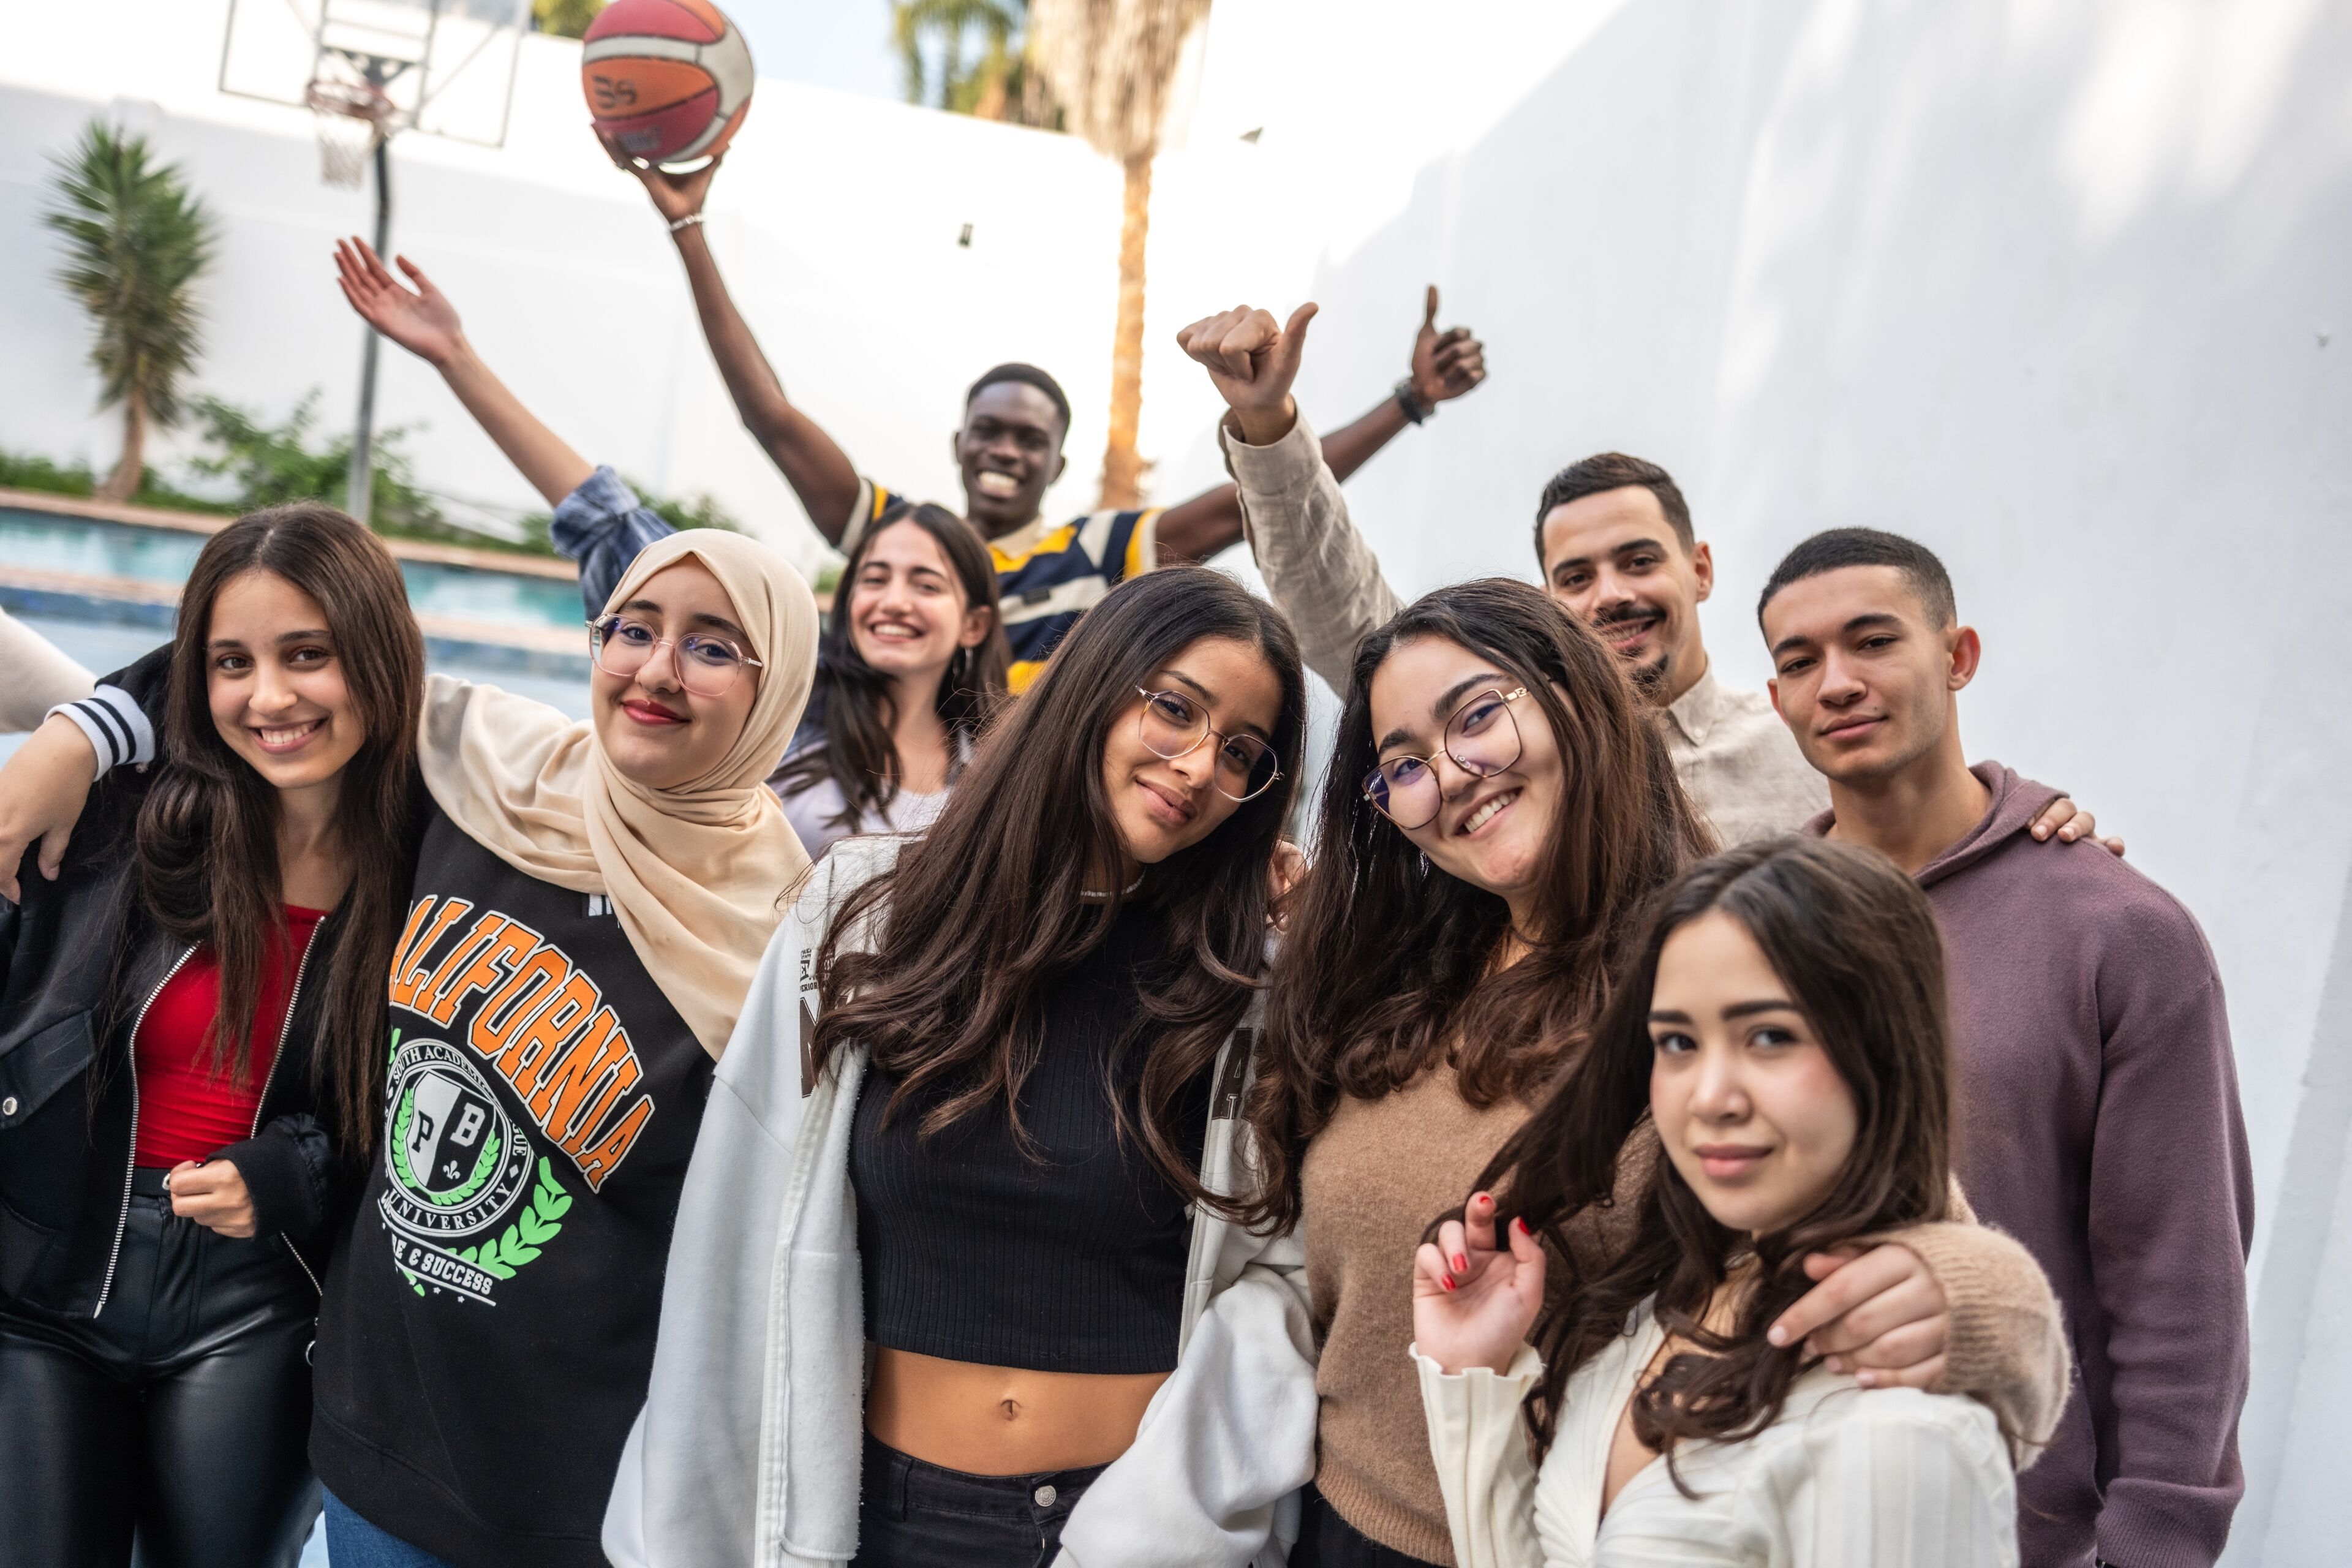 A multiethnic group of young adults share a joyful moment on a sunny day at a basketball court, with some posing and one holding a basketball aloft.